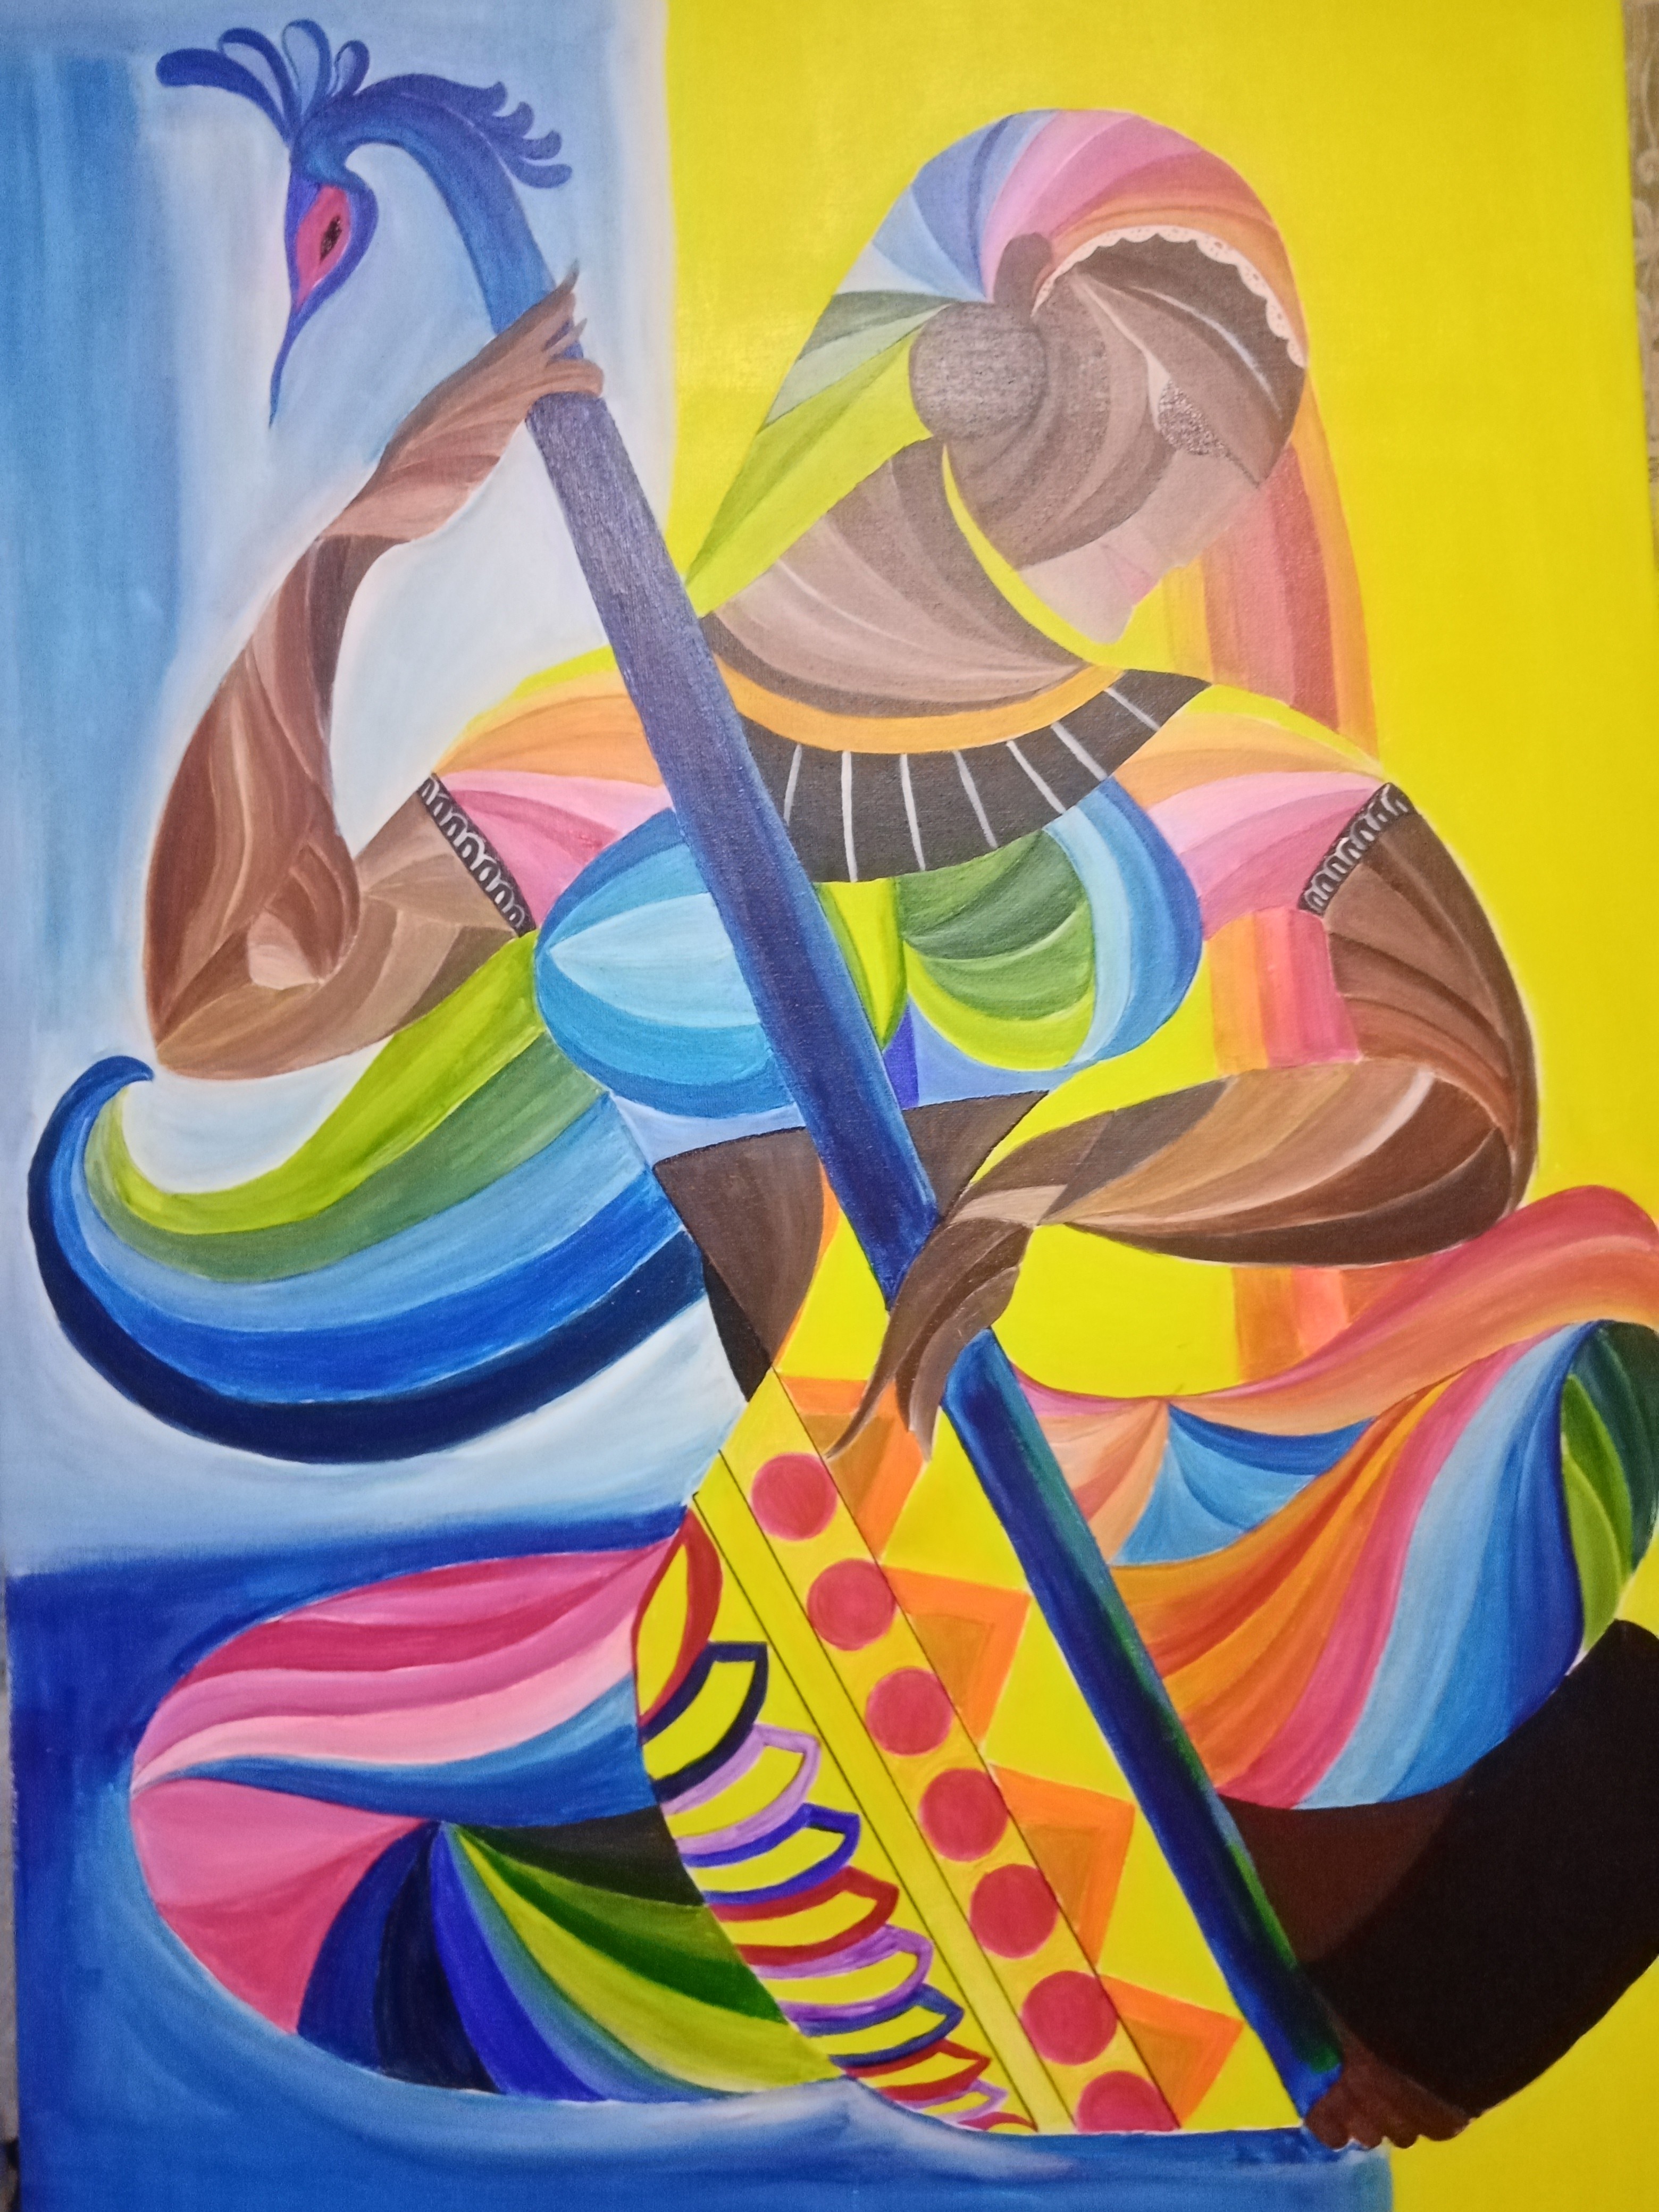 Art of music by Chathurika Ranasinghe